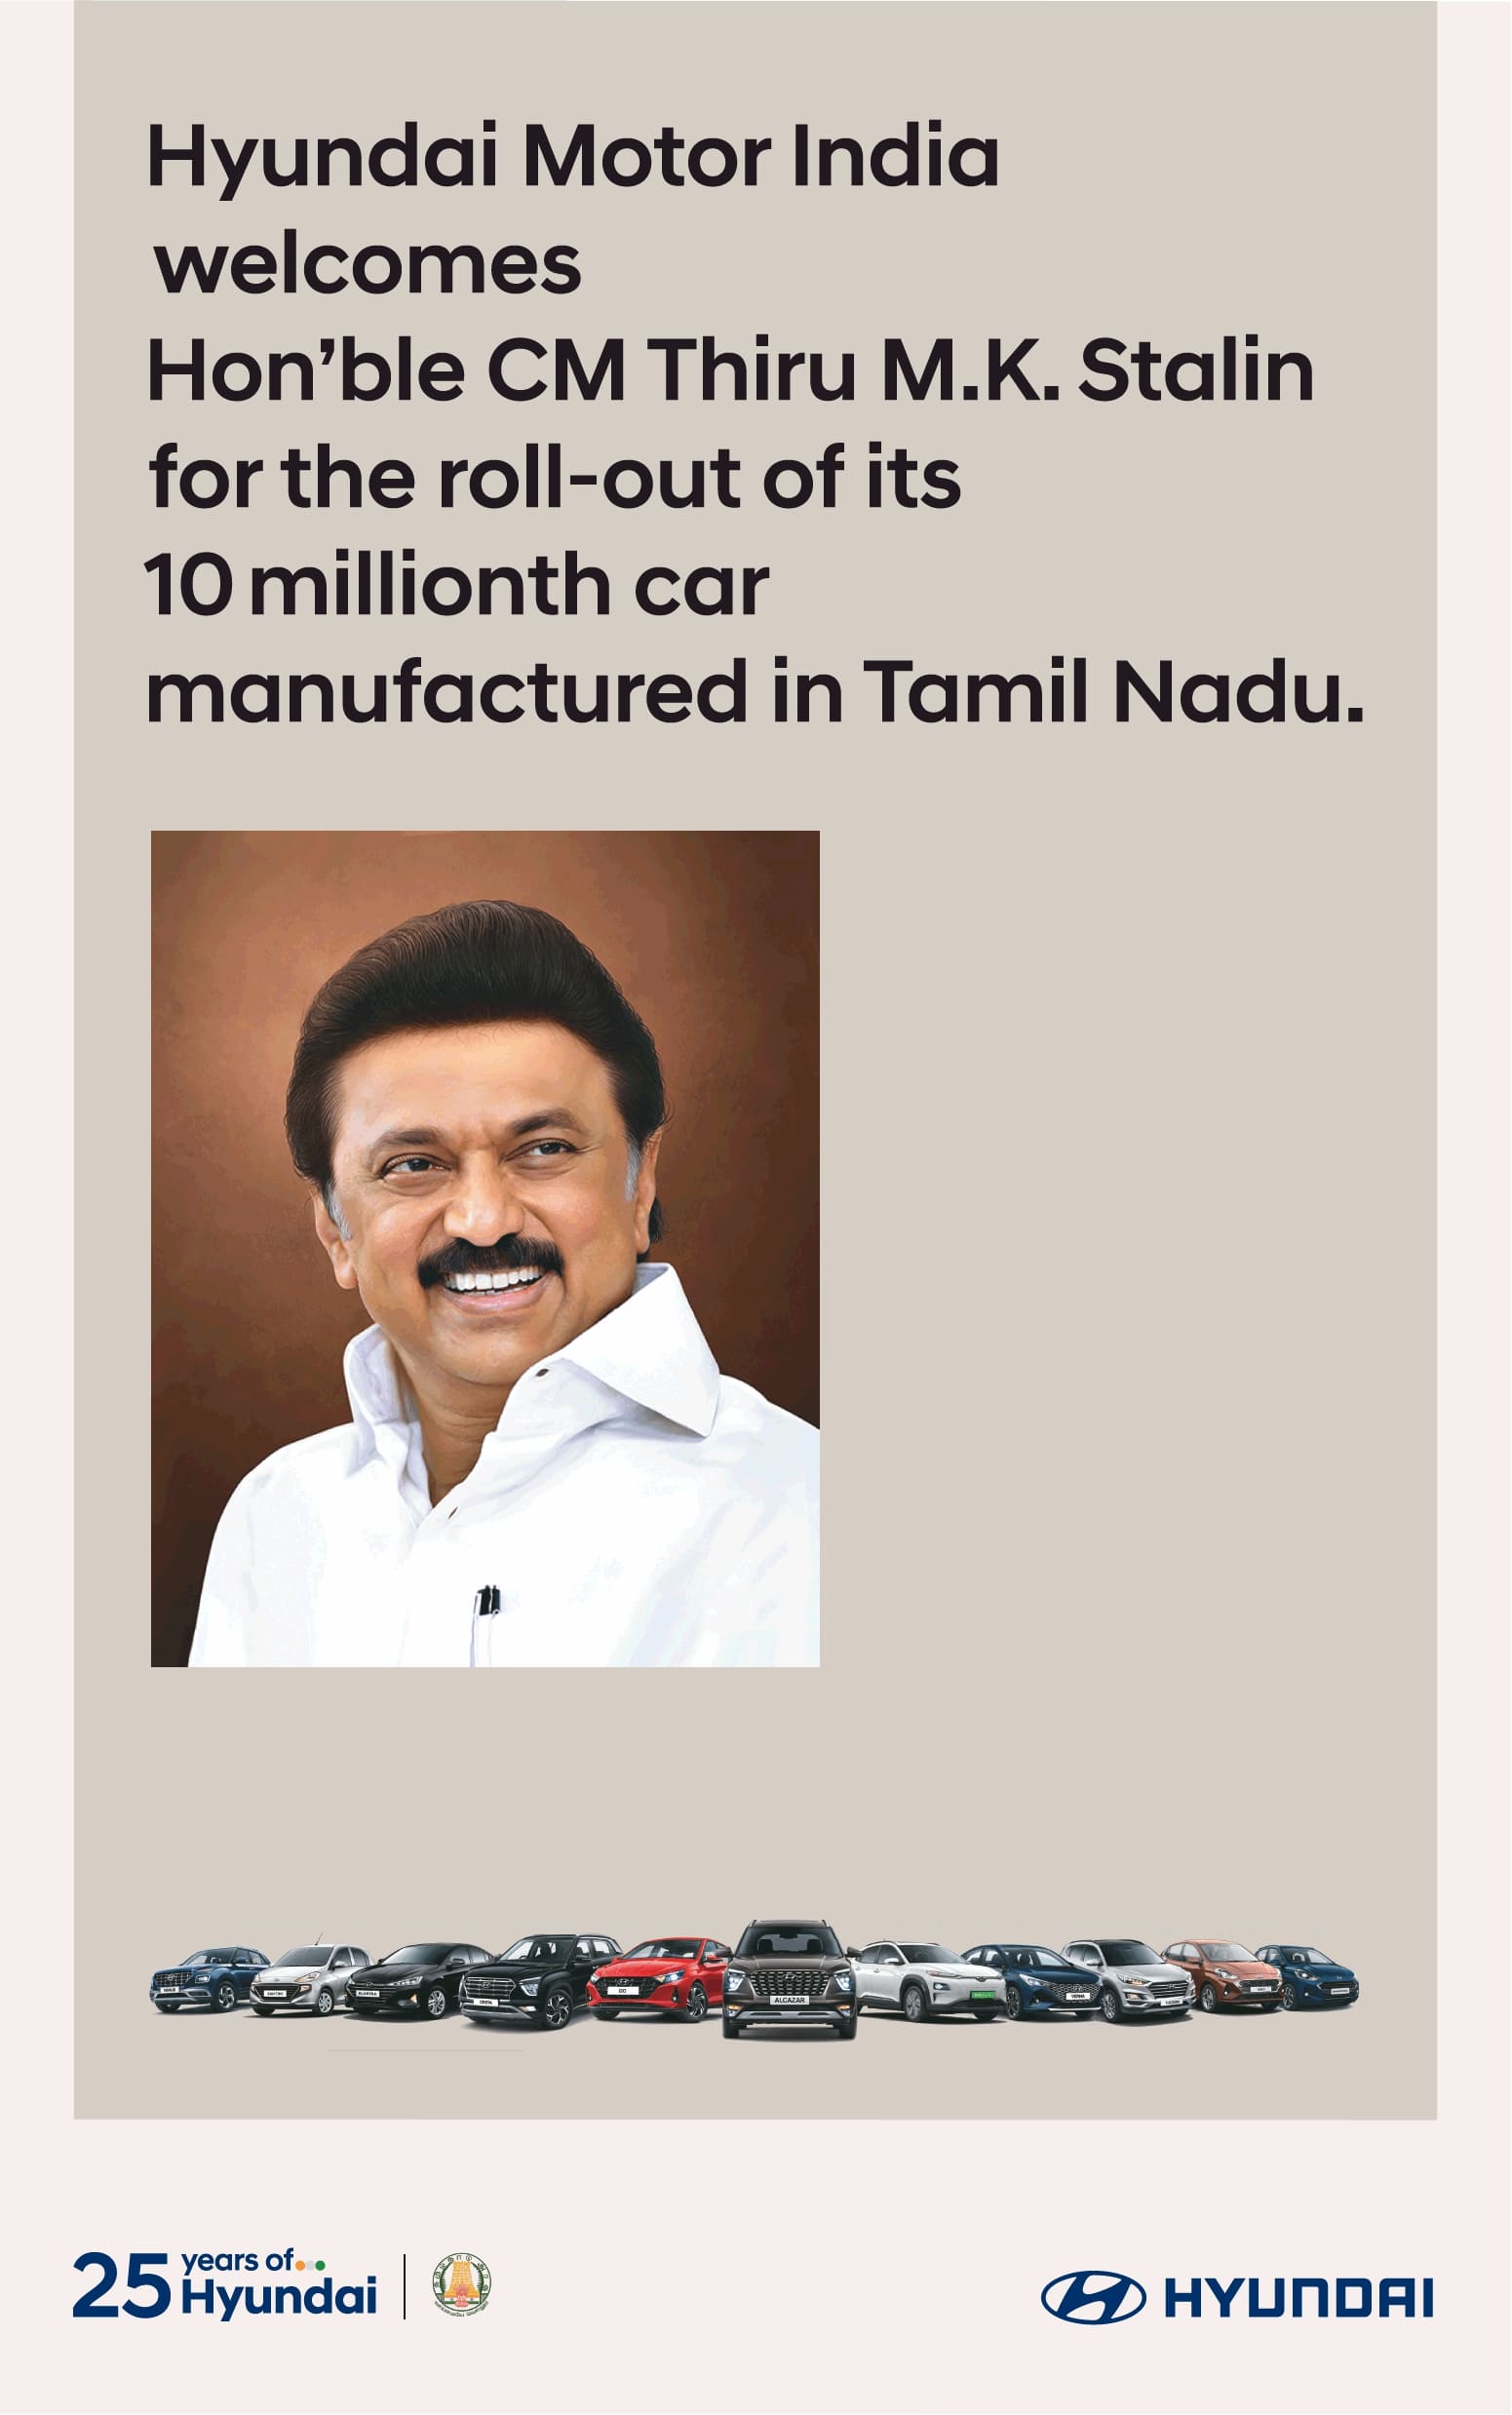 hyundai-motor-india-welcomes-honble-cm-thiru-mk-stalin-for-the-roll-out-of-10-millionth-car-manufactured-in-tamilnadu-ad-toi-chennai-30-6-2021